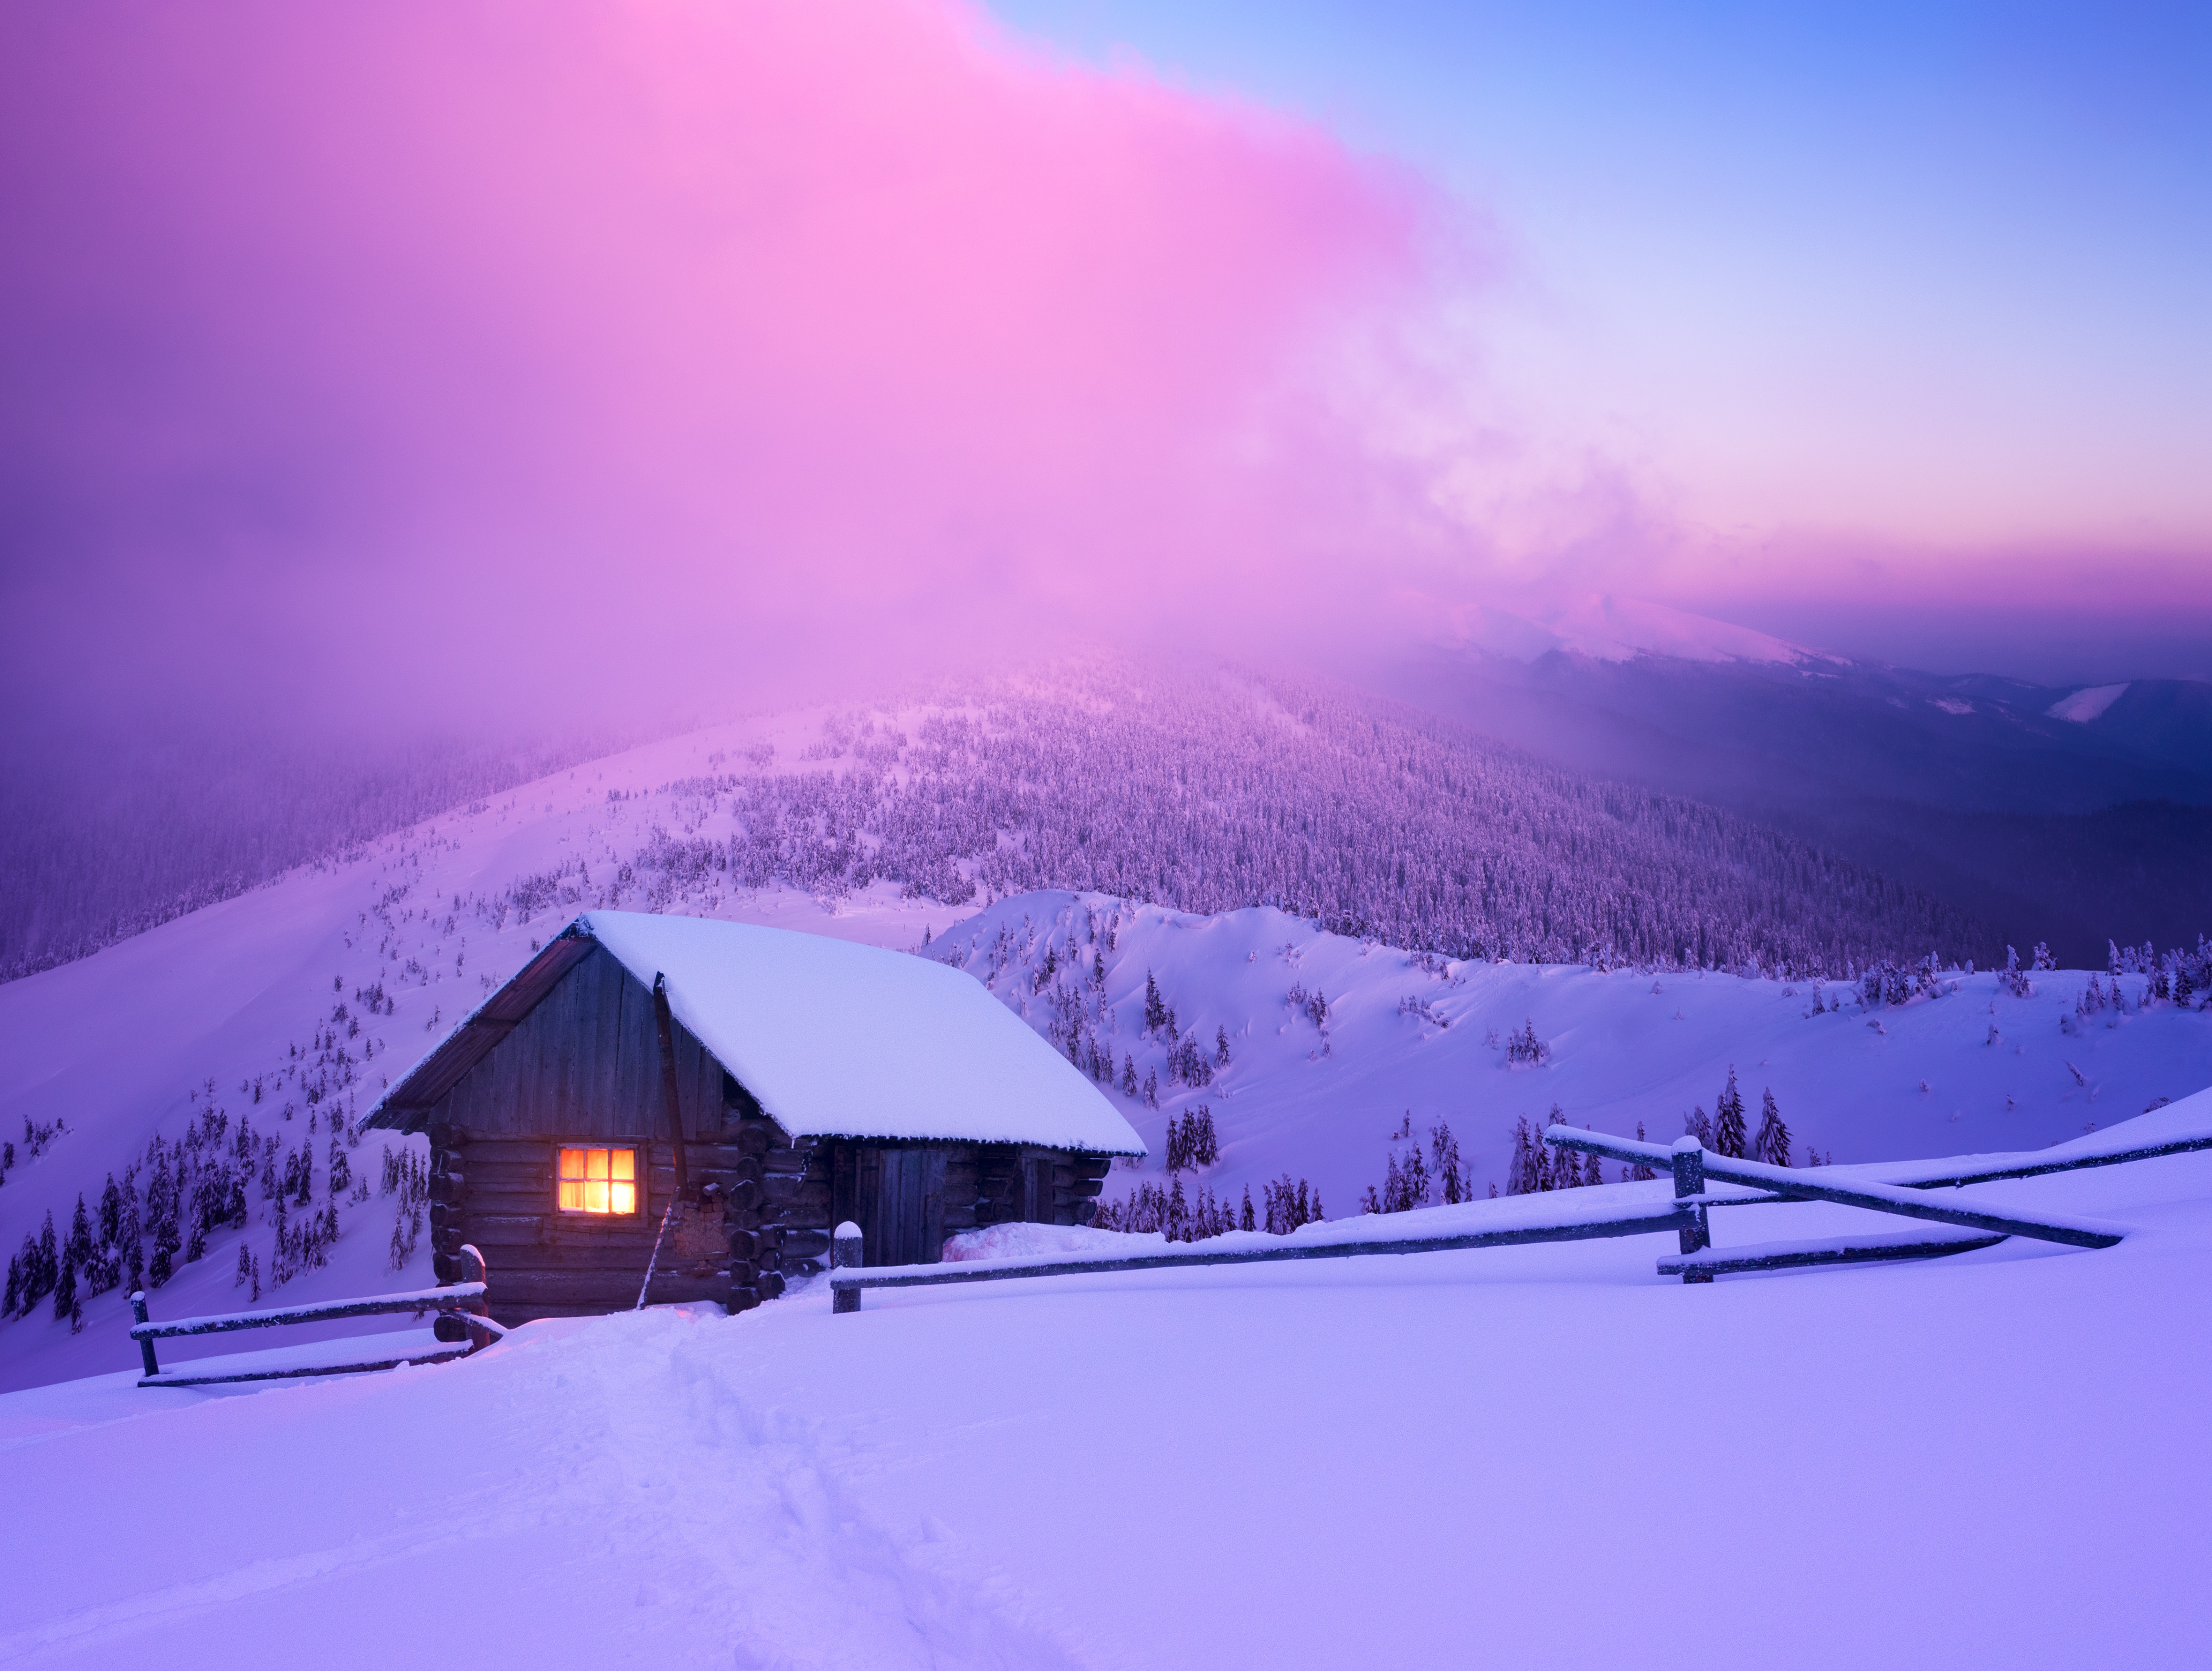 General 4633x3500 winter snow house mountains forest fence lights sunset sky clouds nature landscape cabin